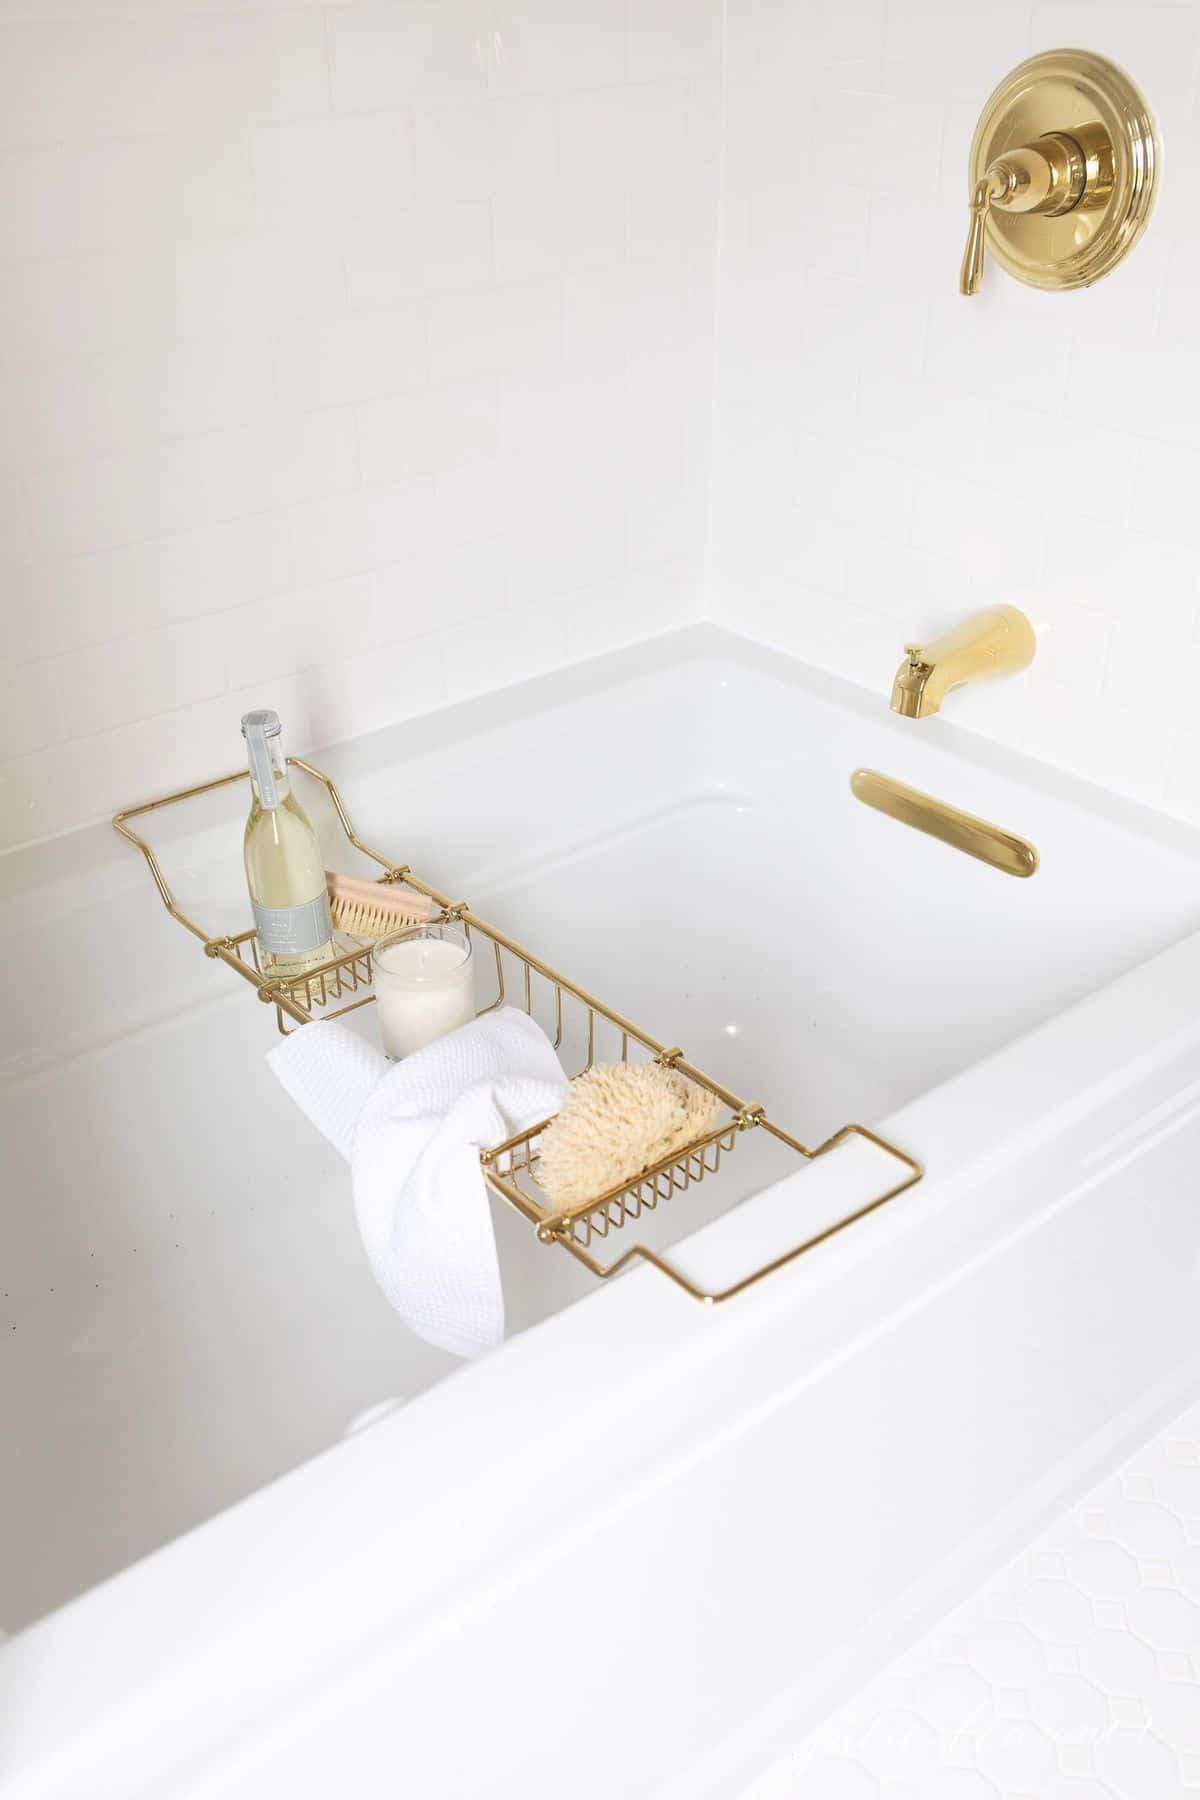 A white bathtub surrounded by white subway tile with brass fittings.